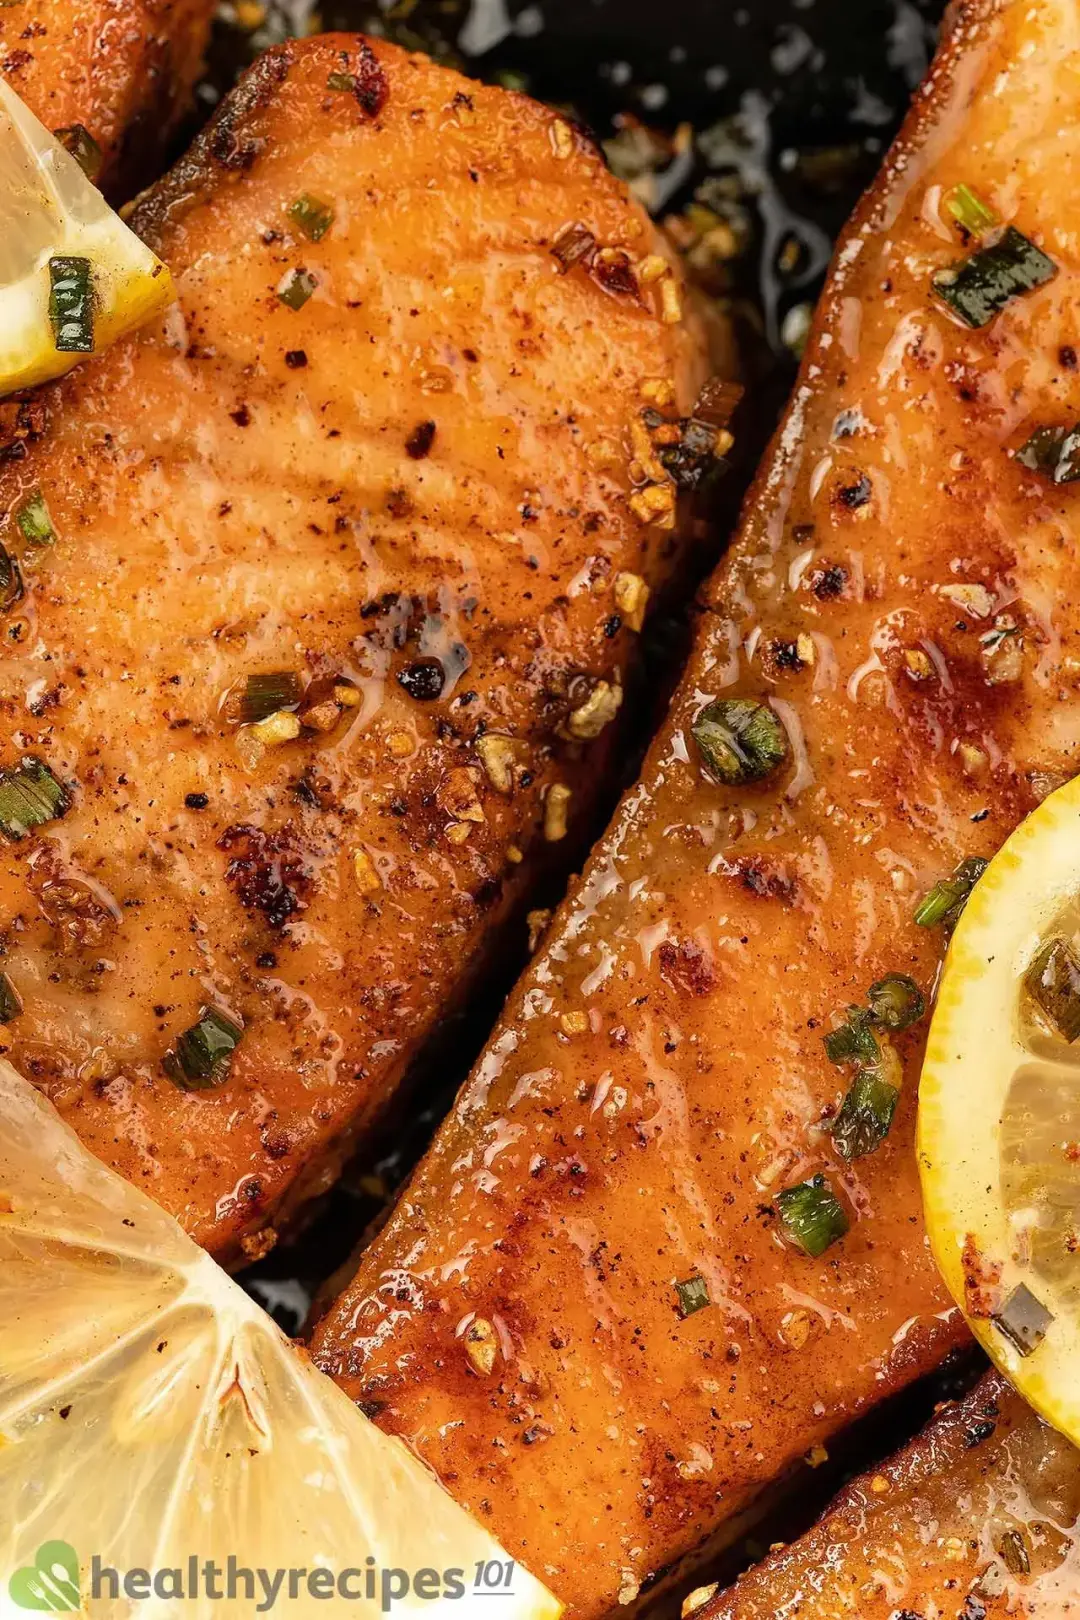 A close-up shot of charred salmon filets coated in a glossy herby sauce